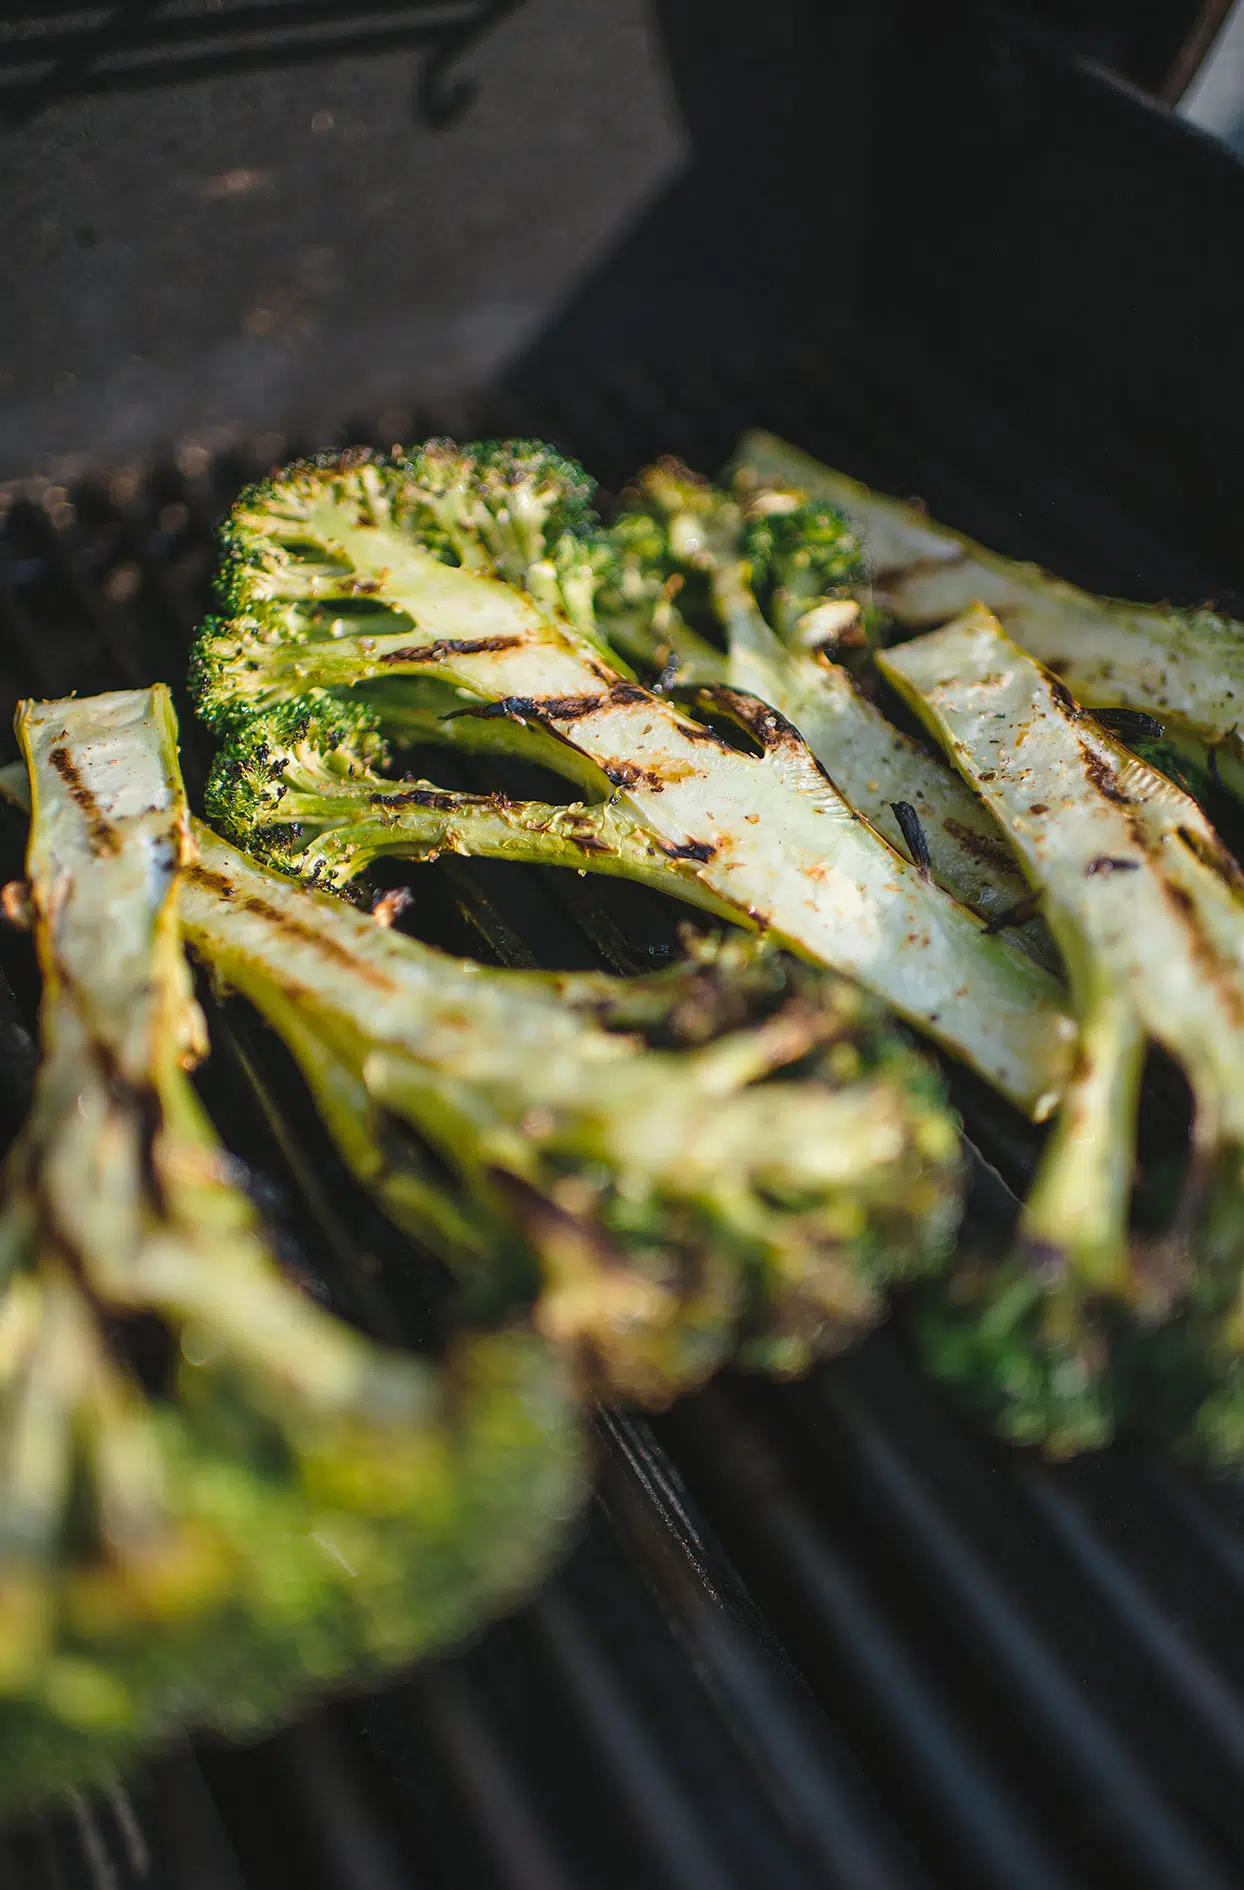 Barbecued grilled broccoli